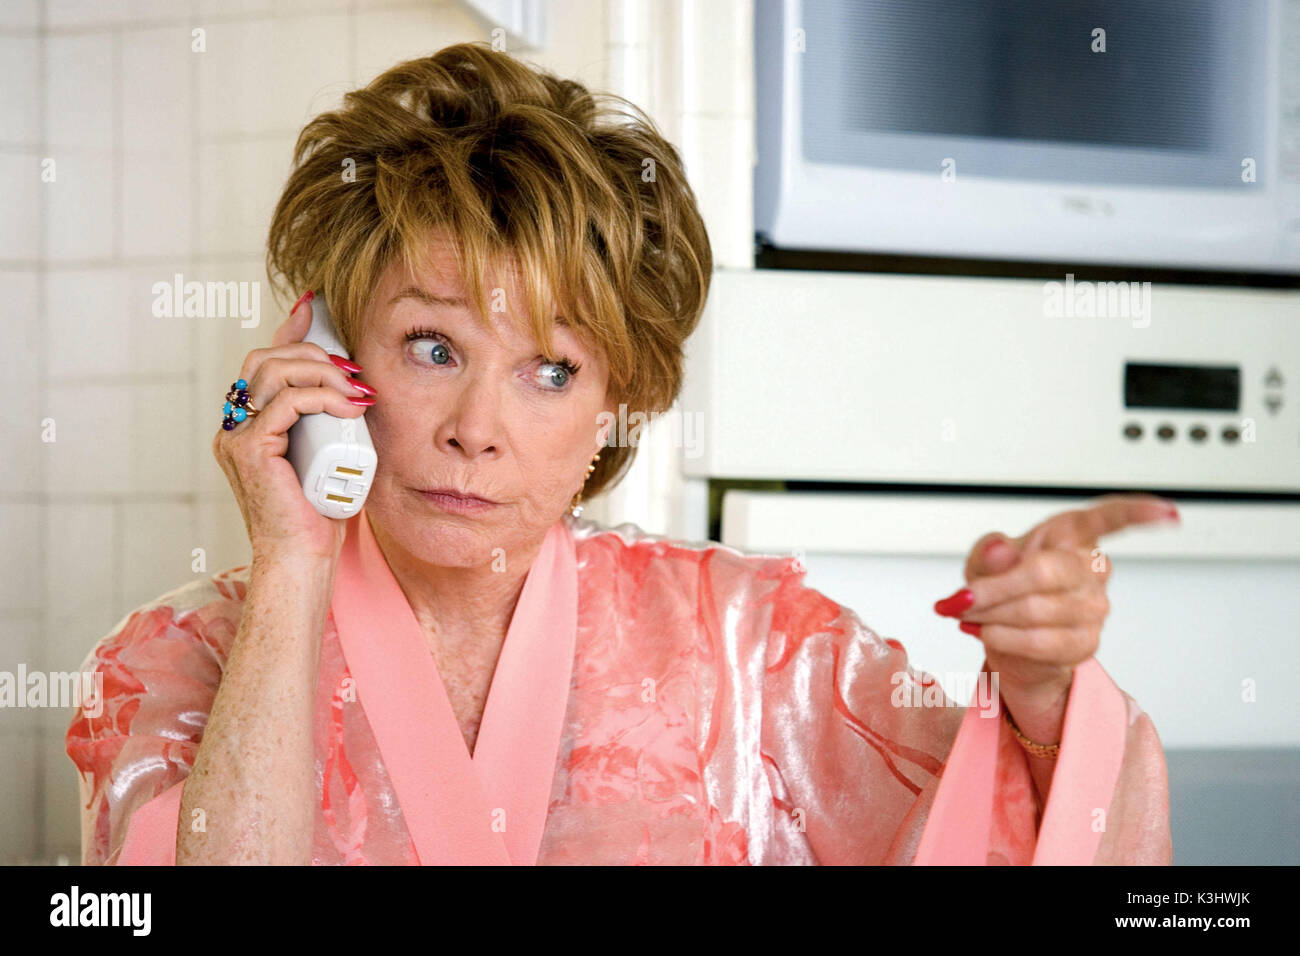 SHIRLEY MacLAINE in Warner Bros. Pictures' and Village Roadshow Pictures' romantic comedy ?Rumor Has It,? distributed by Warner Bros. Pictures. RUMOR HAS IT... [US 2005]  aka RUMOUR HAS IT...  SHIRLEY MACLAINE     Date: 2005 Stock Photo